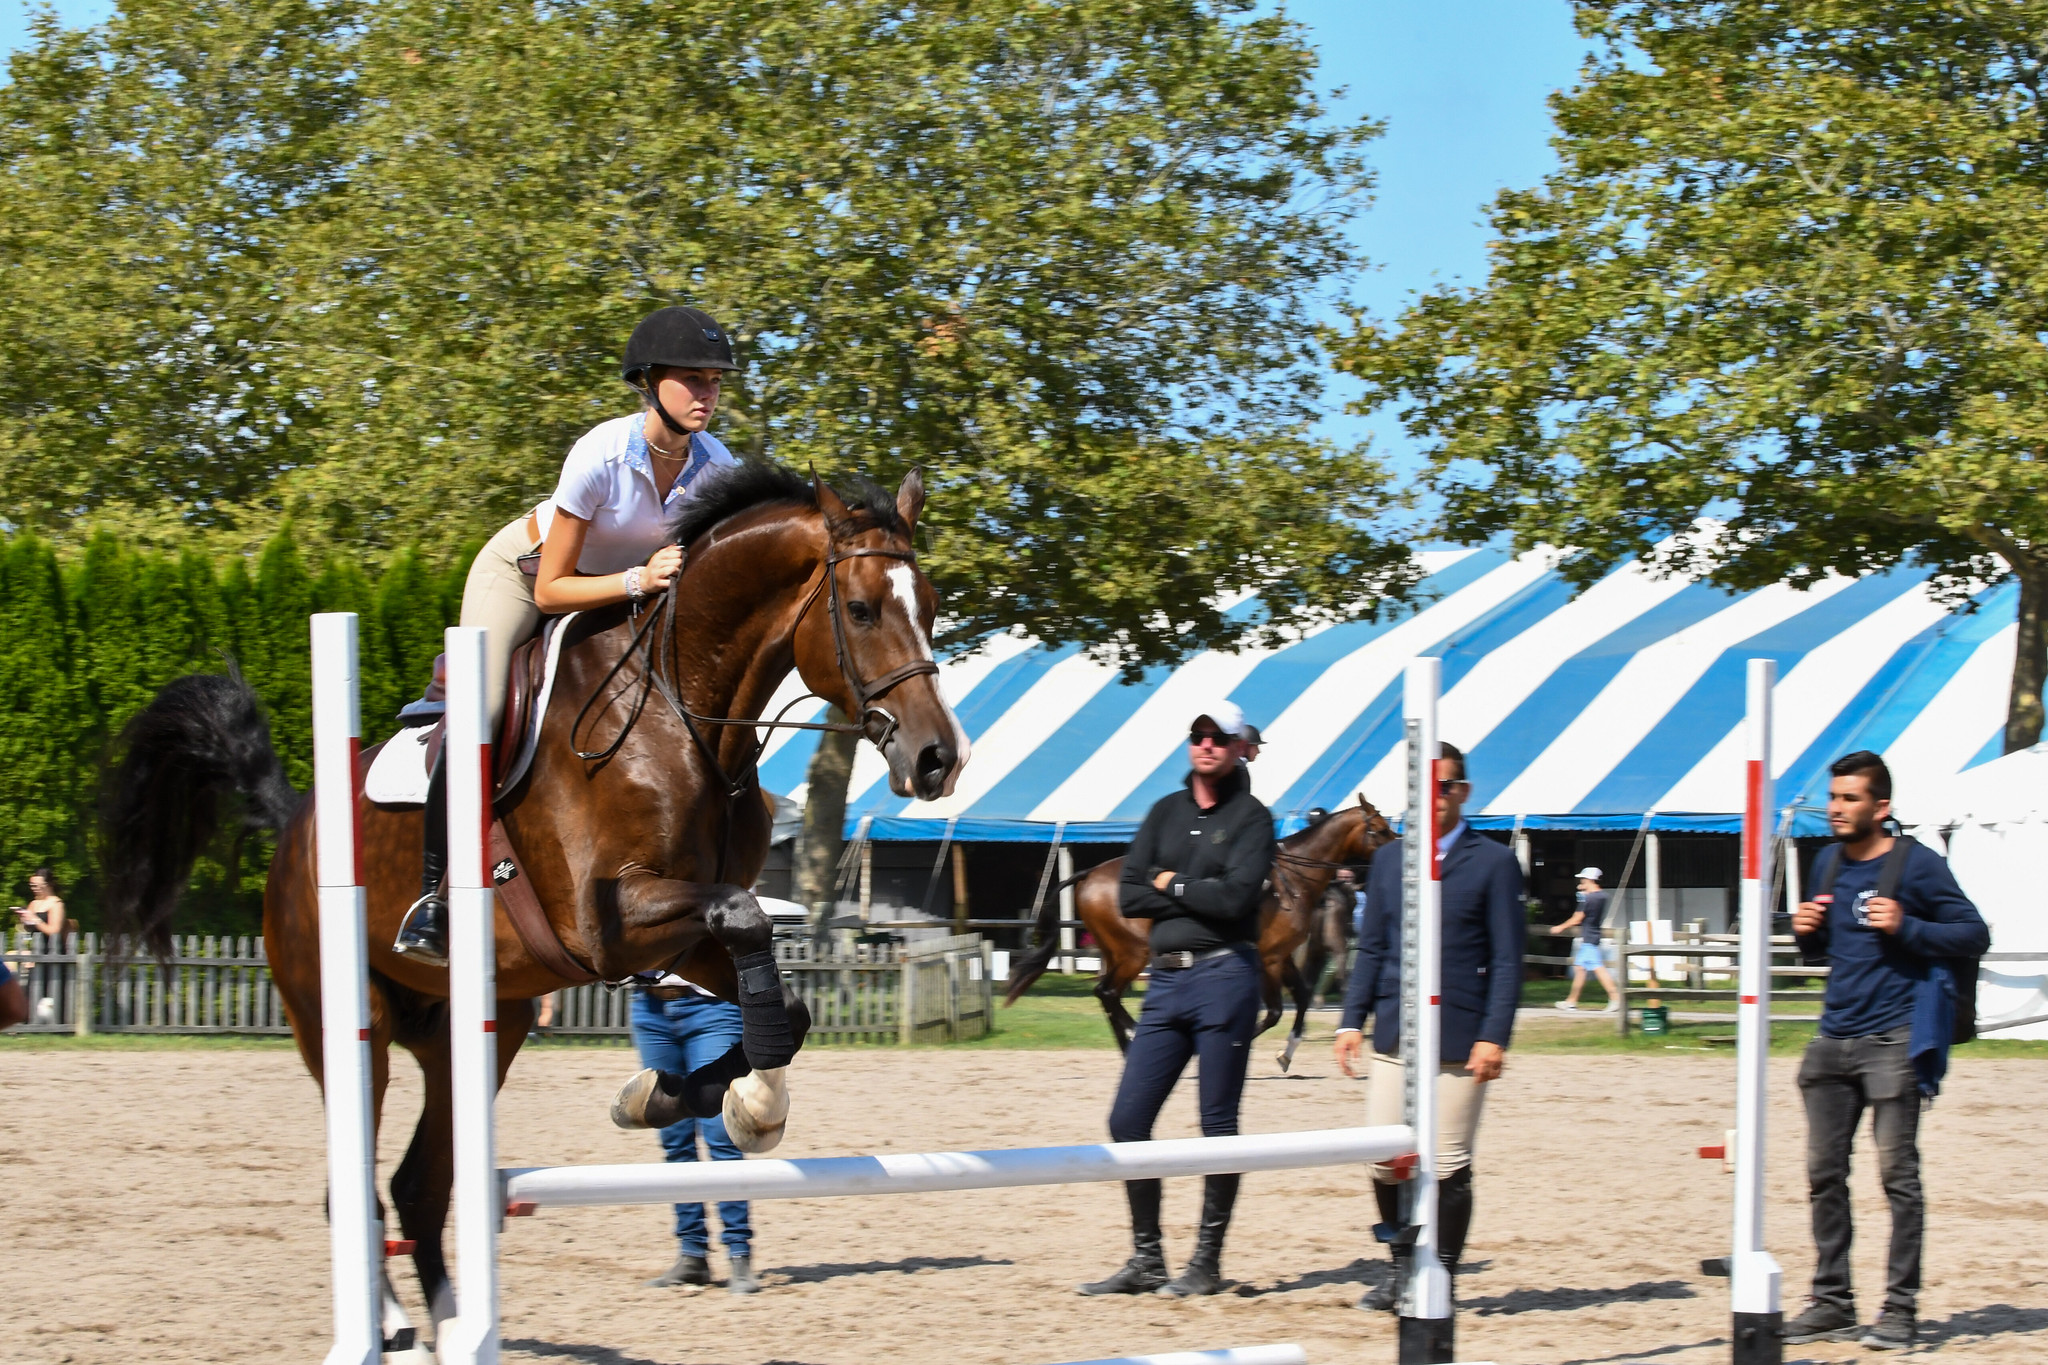 Samantha O'Brien jumping - she will compete at the Hampton Classic